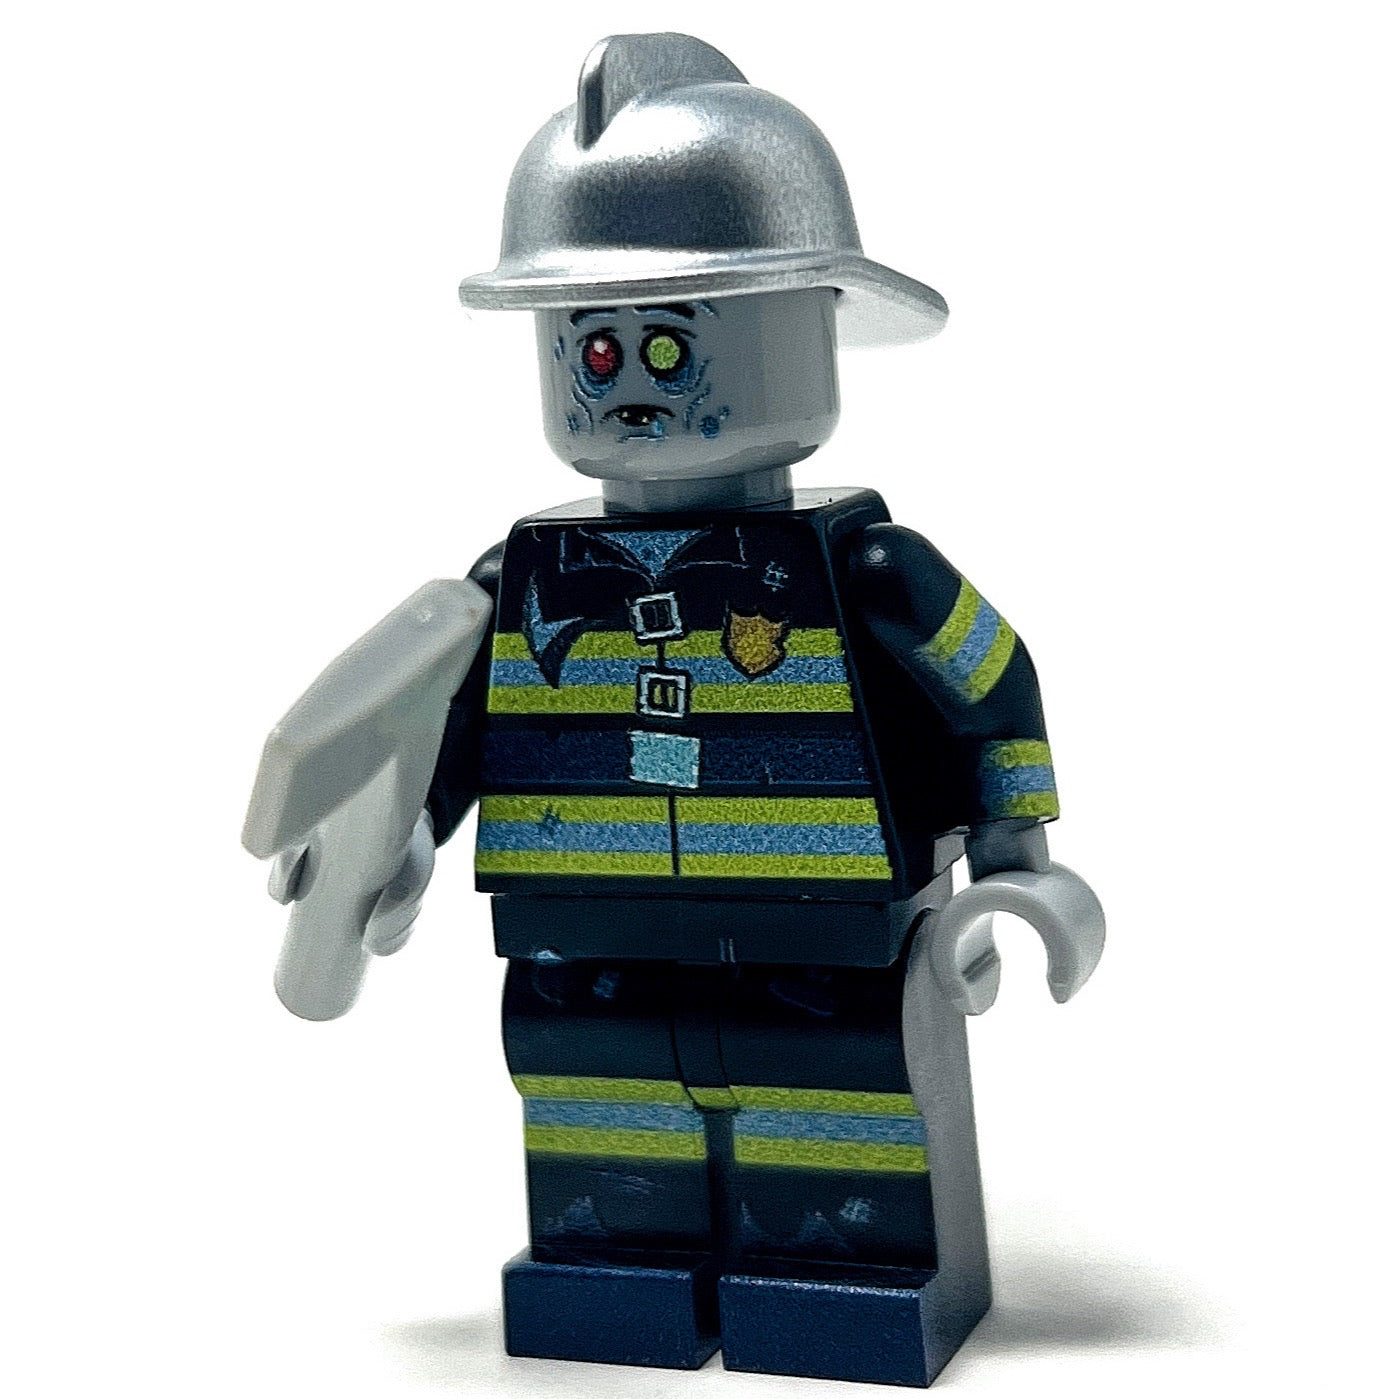 Zombie Firefighter - Custom Minifig made using LEGO parts